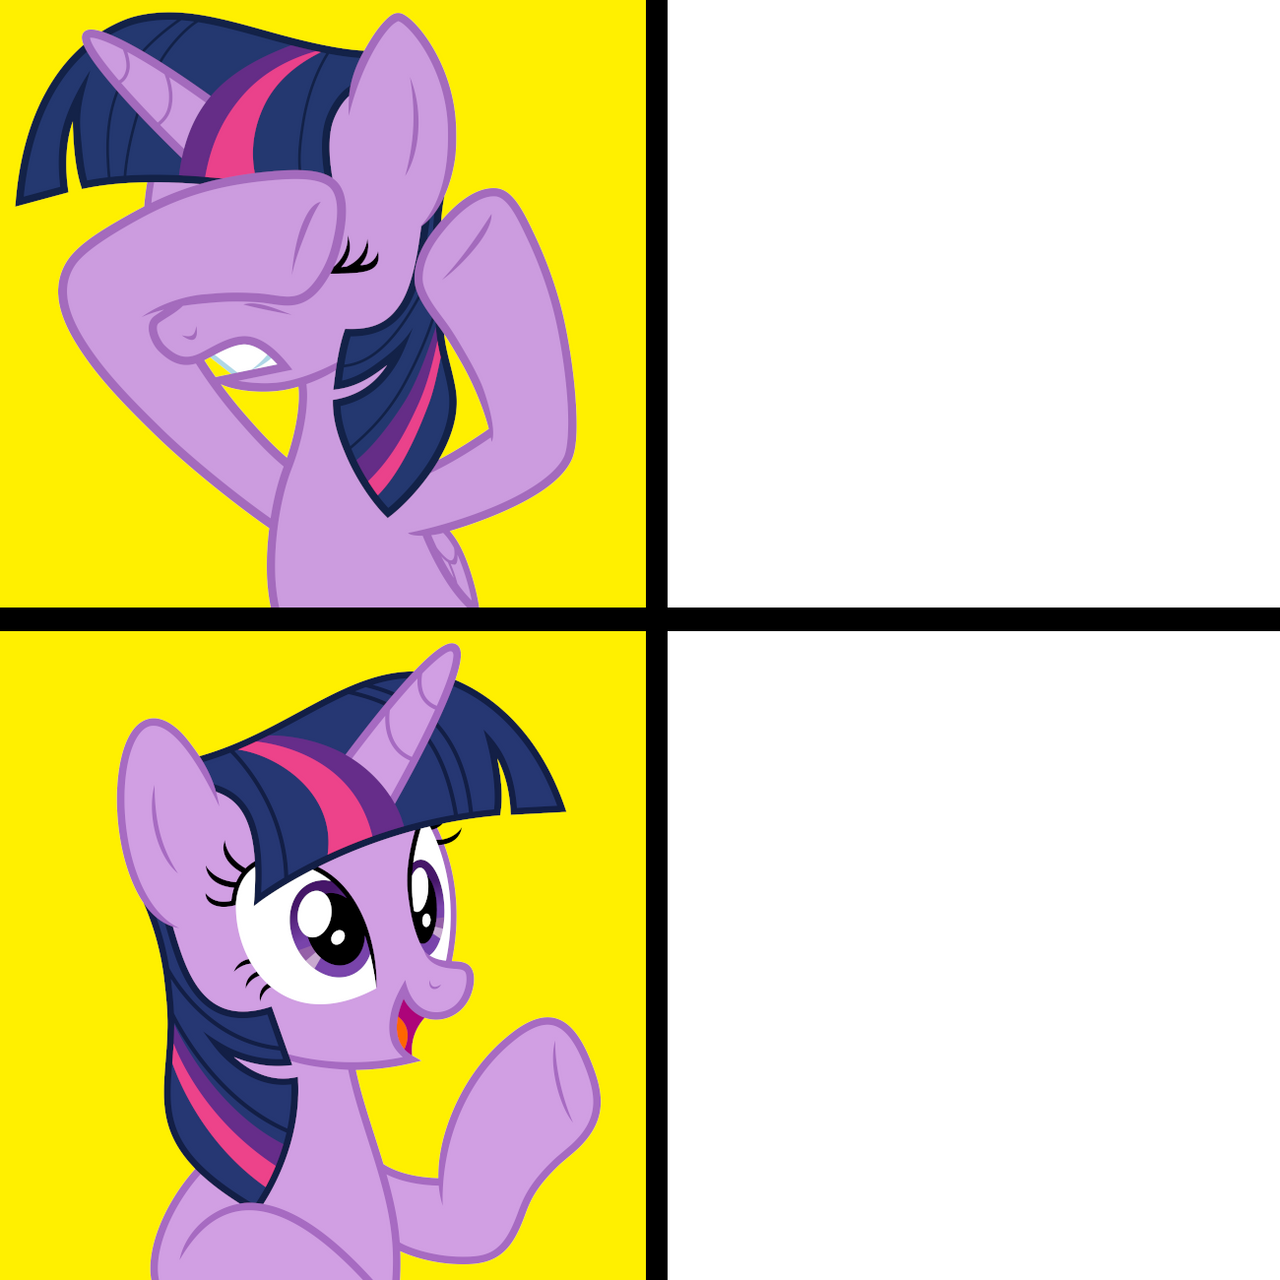 Twilight Sparkle Disapproves/Approves Blank Meme Template